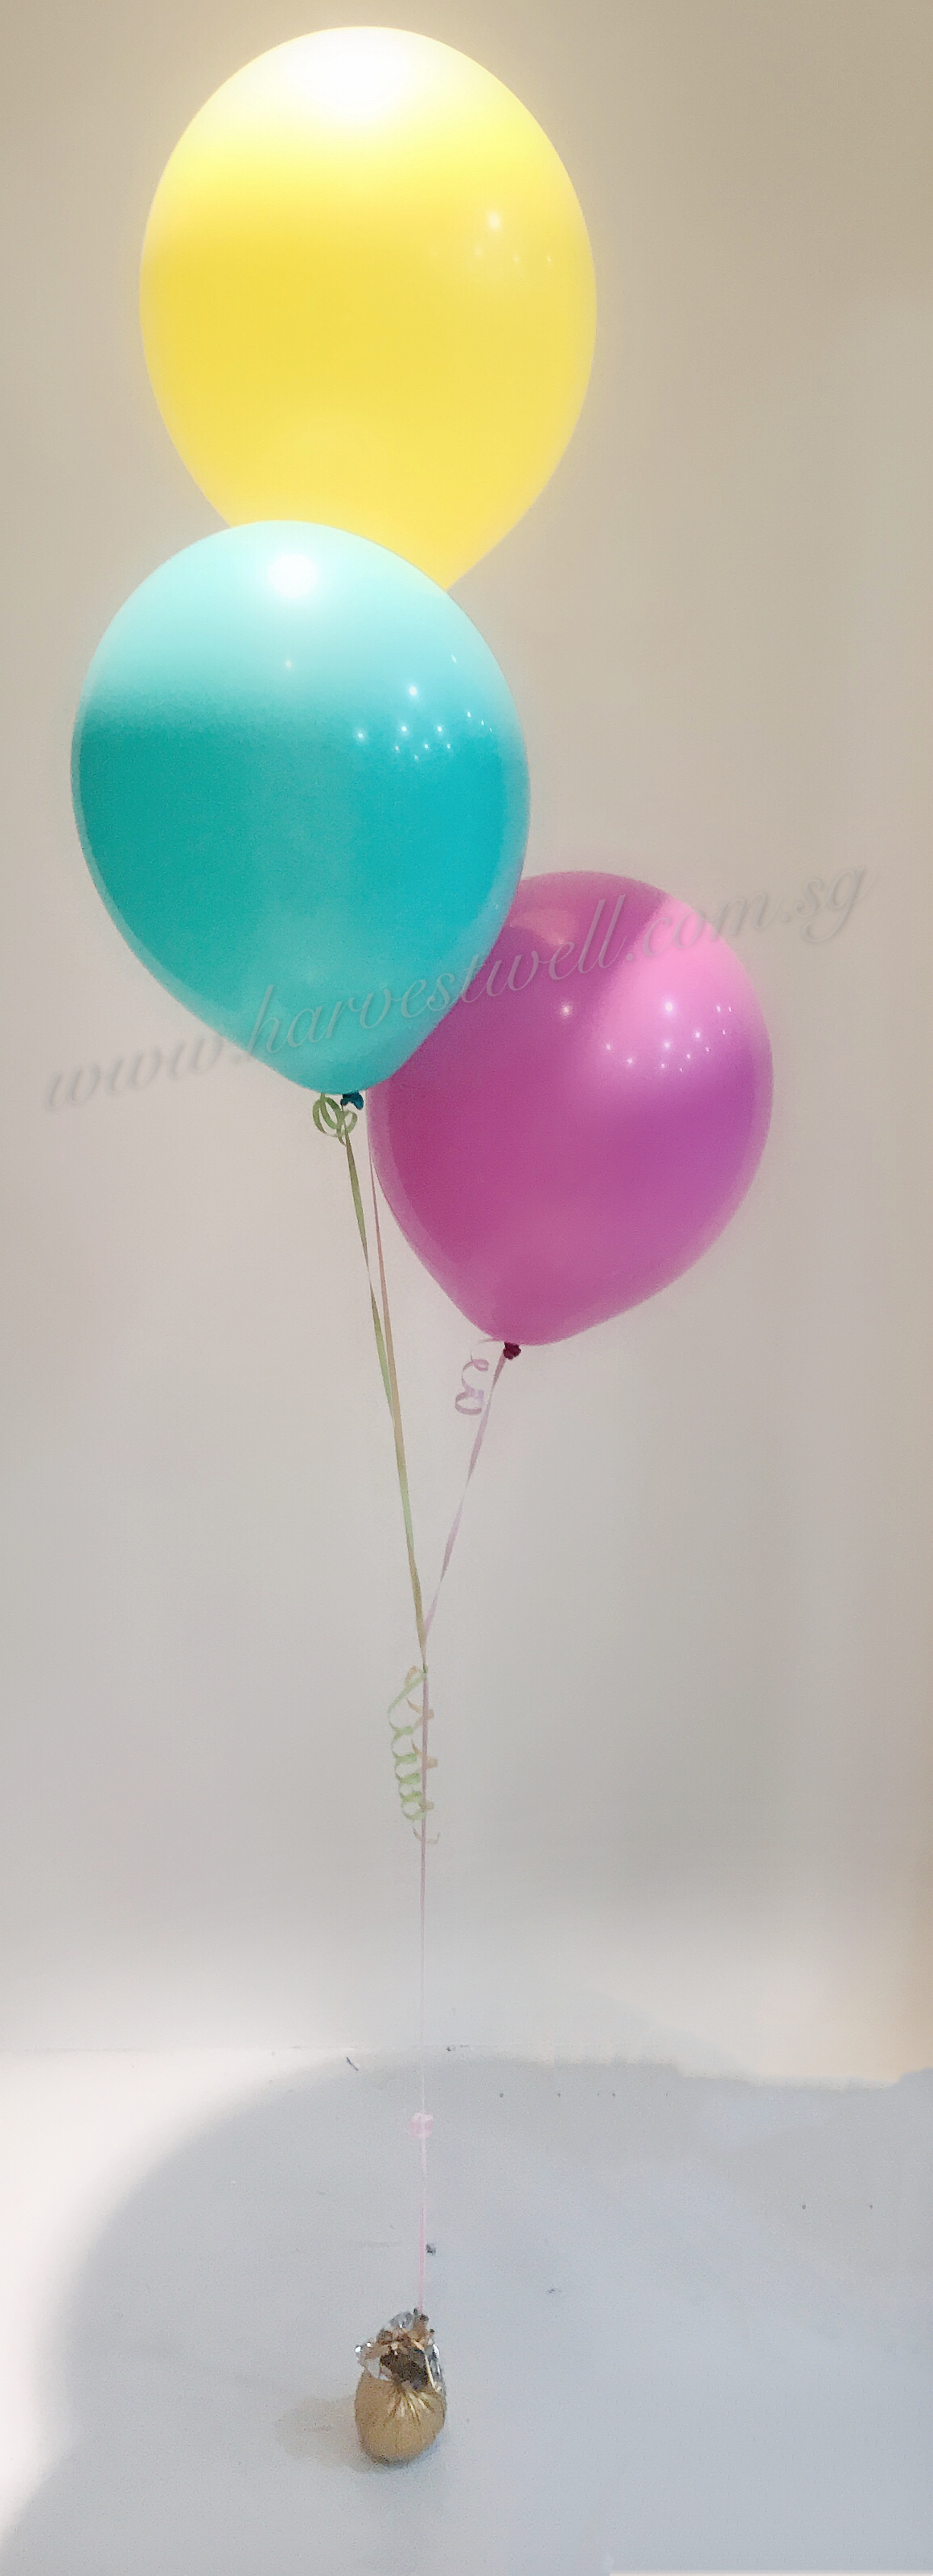 Create Your Own Balloon Bouquet